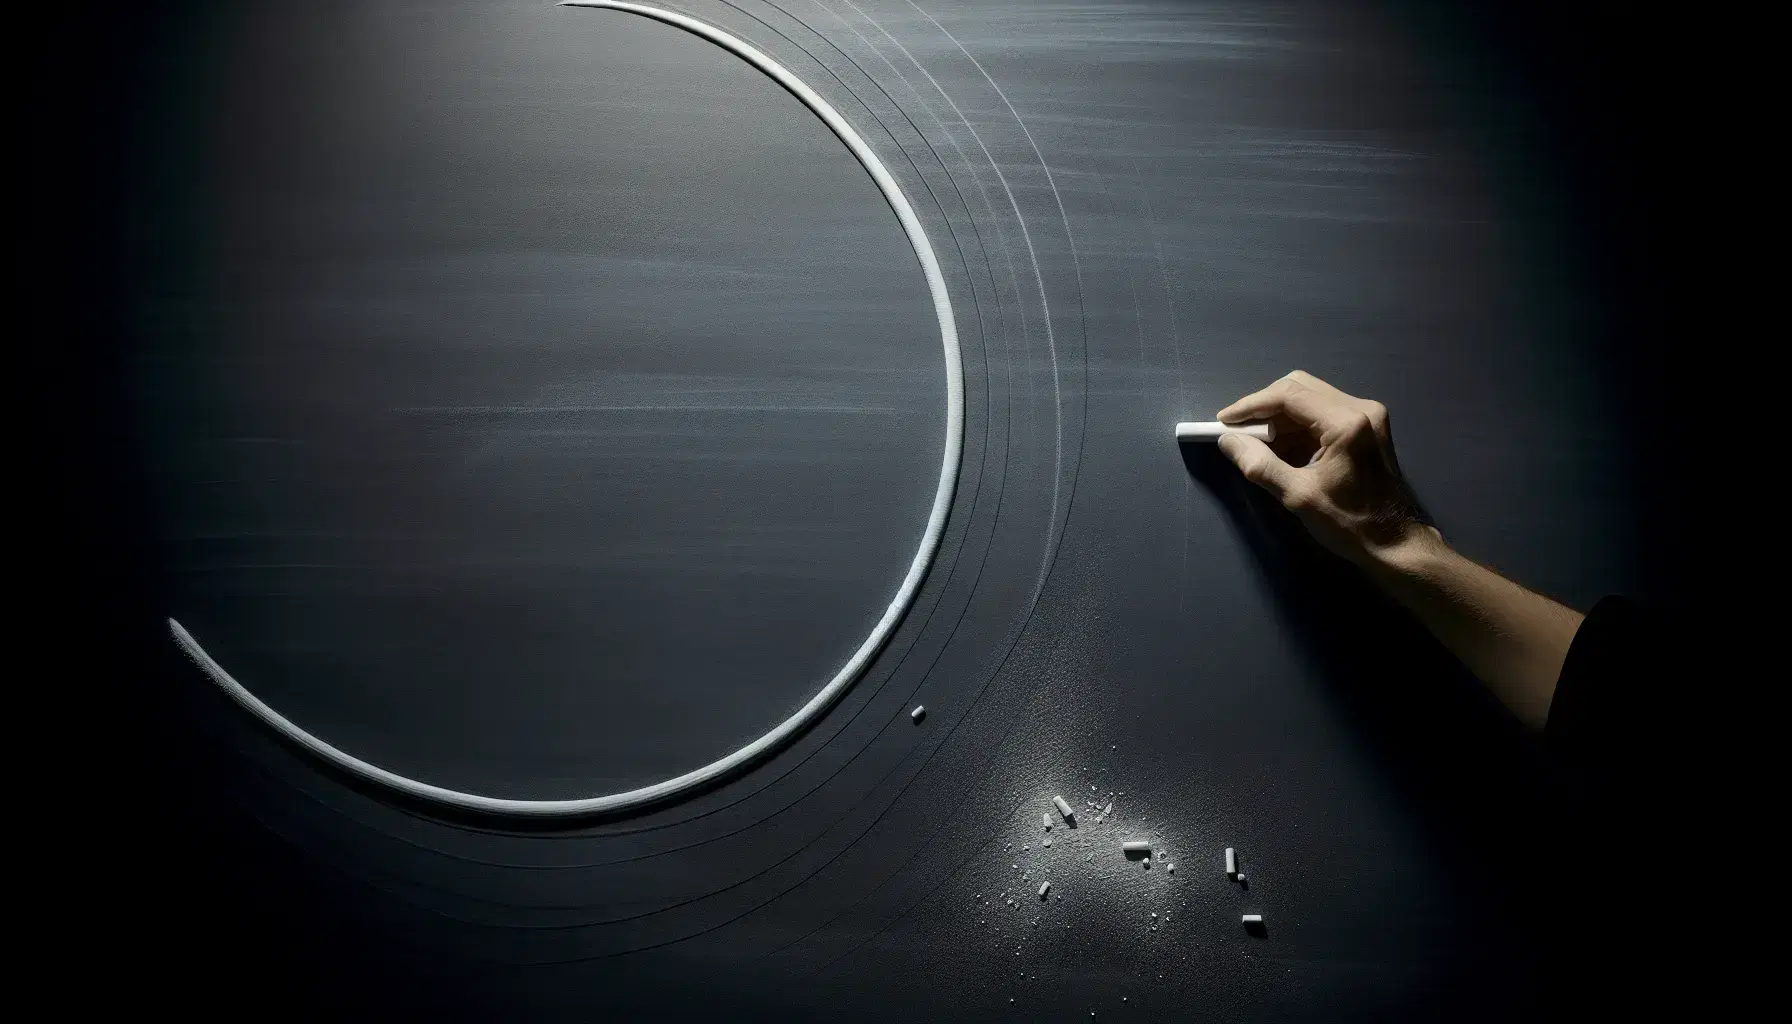 Close-up view of a hand drawing a smooth curve with white chalk on a blackboard, with visible chalk dust particles below.